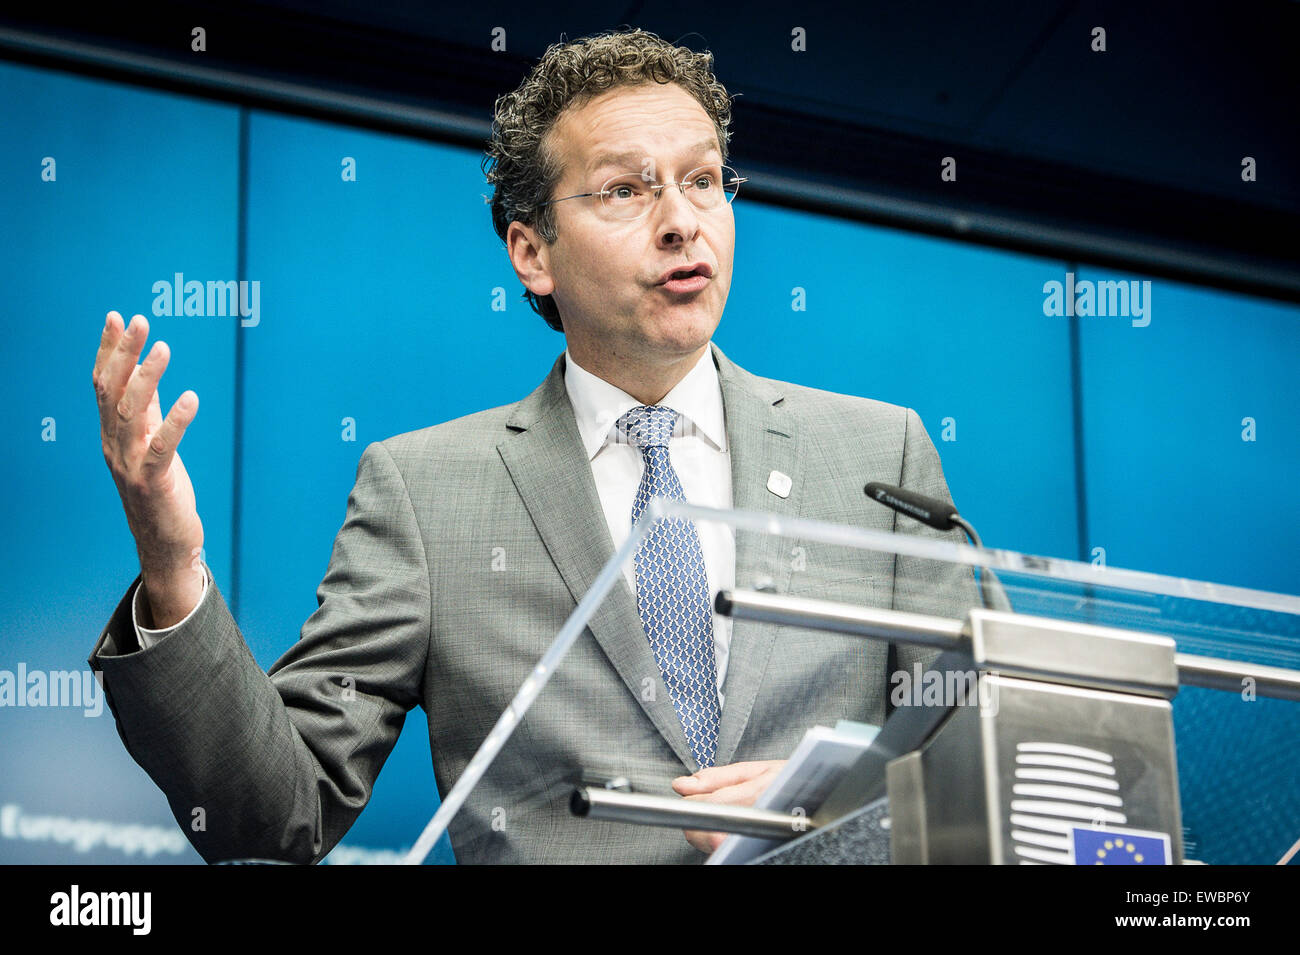 Brussels, Belgium. 22nd June, 2015. Eurogroup President Dutch Finance Minister Jeroen Dijsselbloem holds a press conference after a special Eurogroup finance ministers meeting on Greece at European Council headquarters in Brussels, Belgium on 22.06.2015 Heads of Eurozone state will geather for emergency summit on Greek debt today in EU headquarters Credit:  dpa picture alliance/Alamy Live News Stock Photo